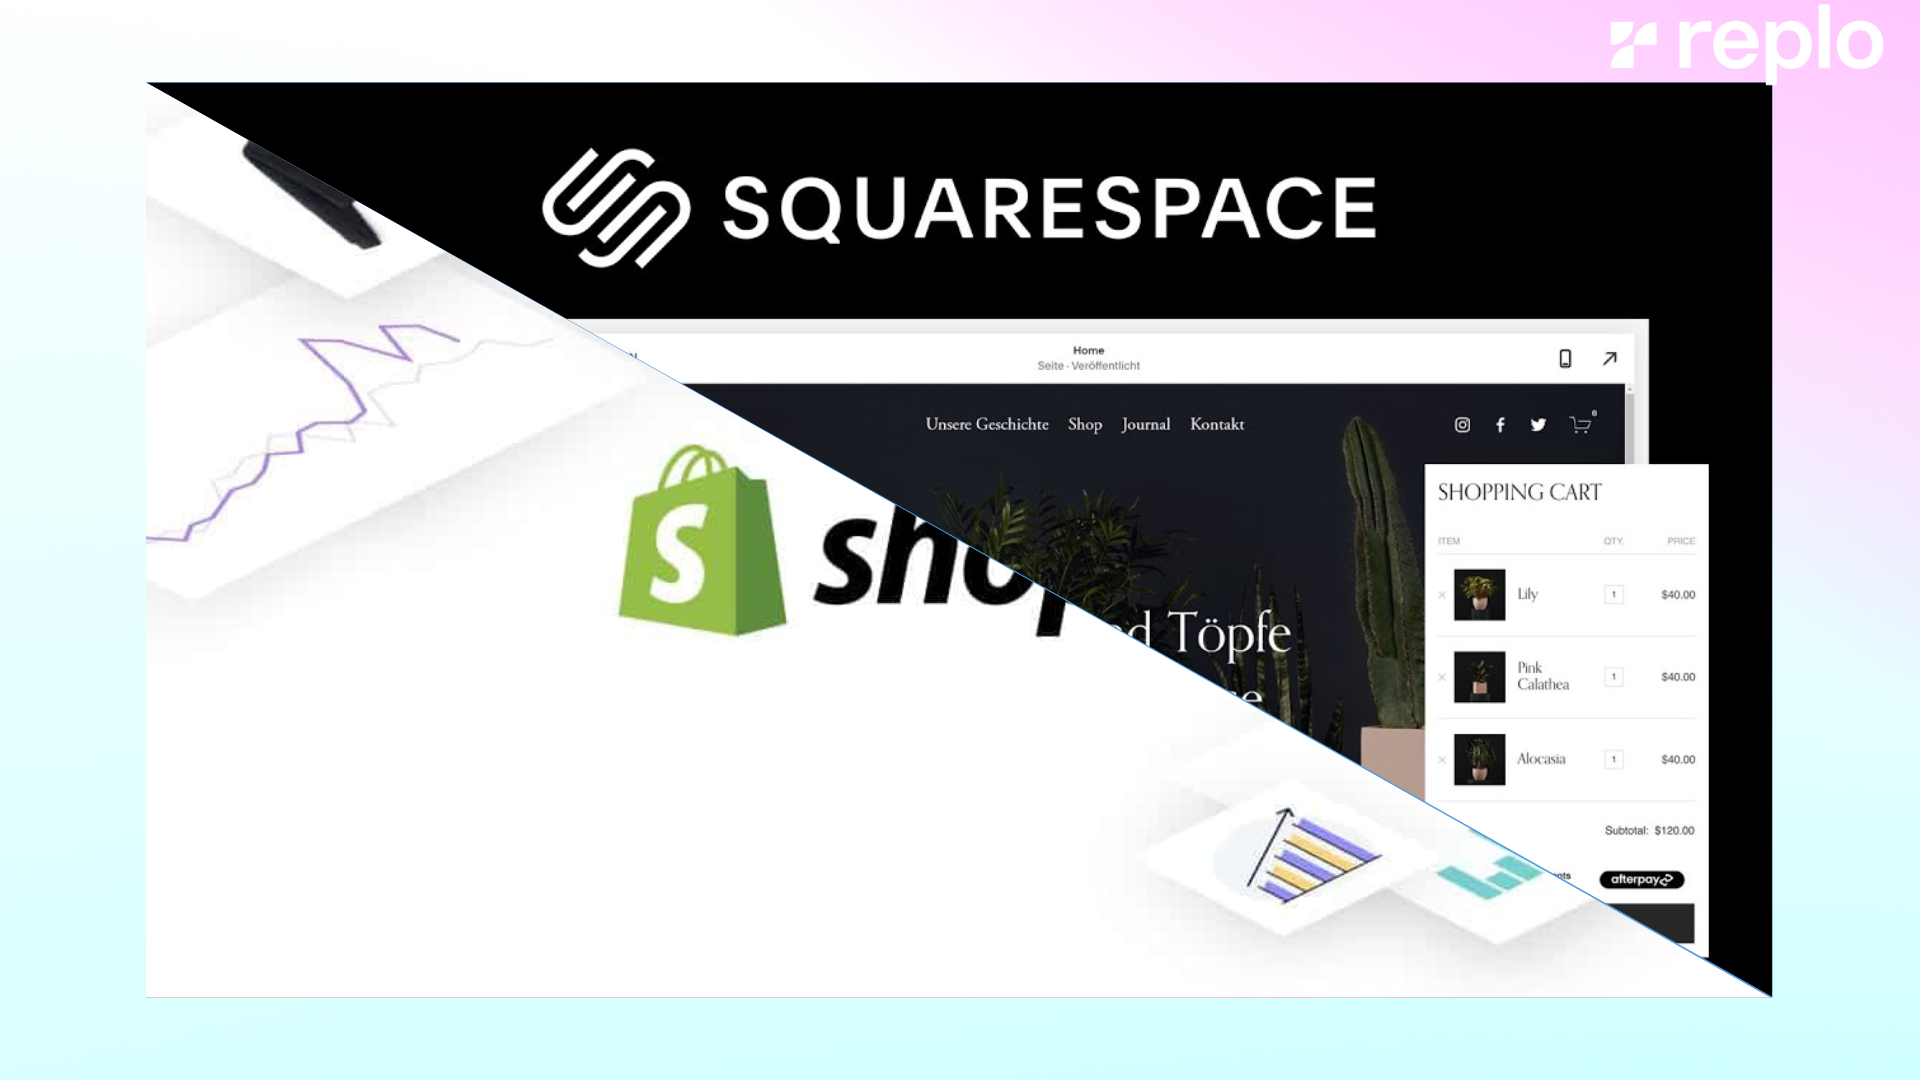 Squarespace vs. Shopify: Which Is The Best eCommerce Platform?